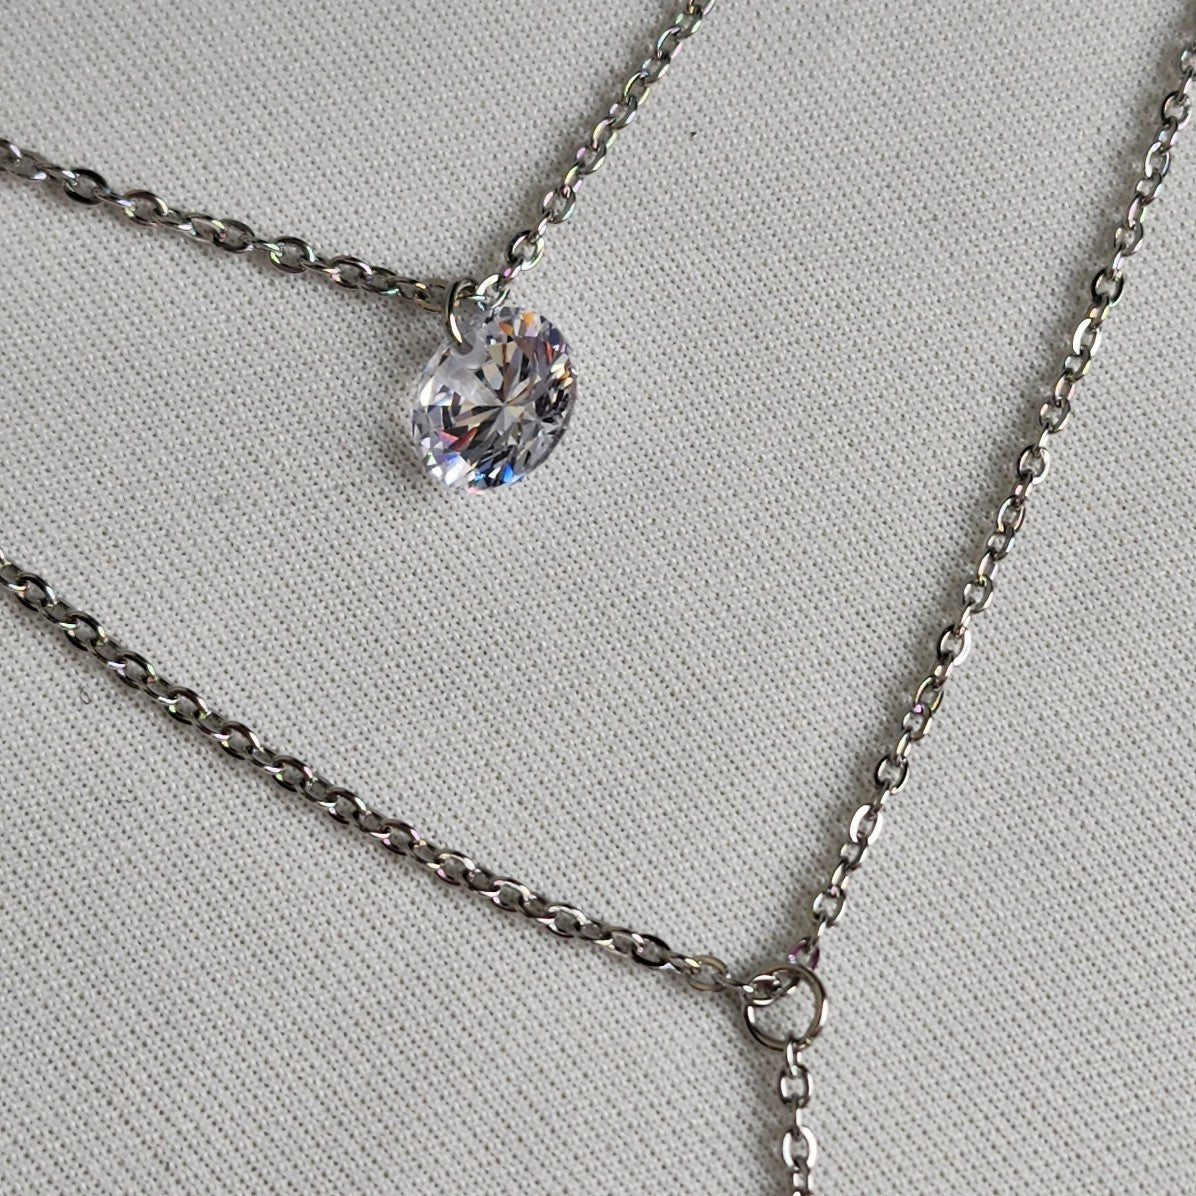 Steel X Stainless Steel Crystal Pendant Layered Delicate Chain Necklace